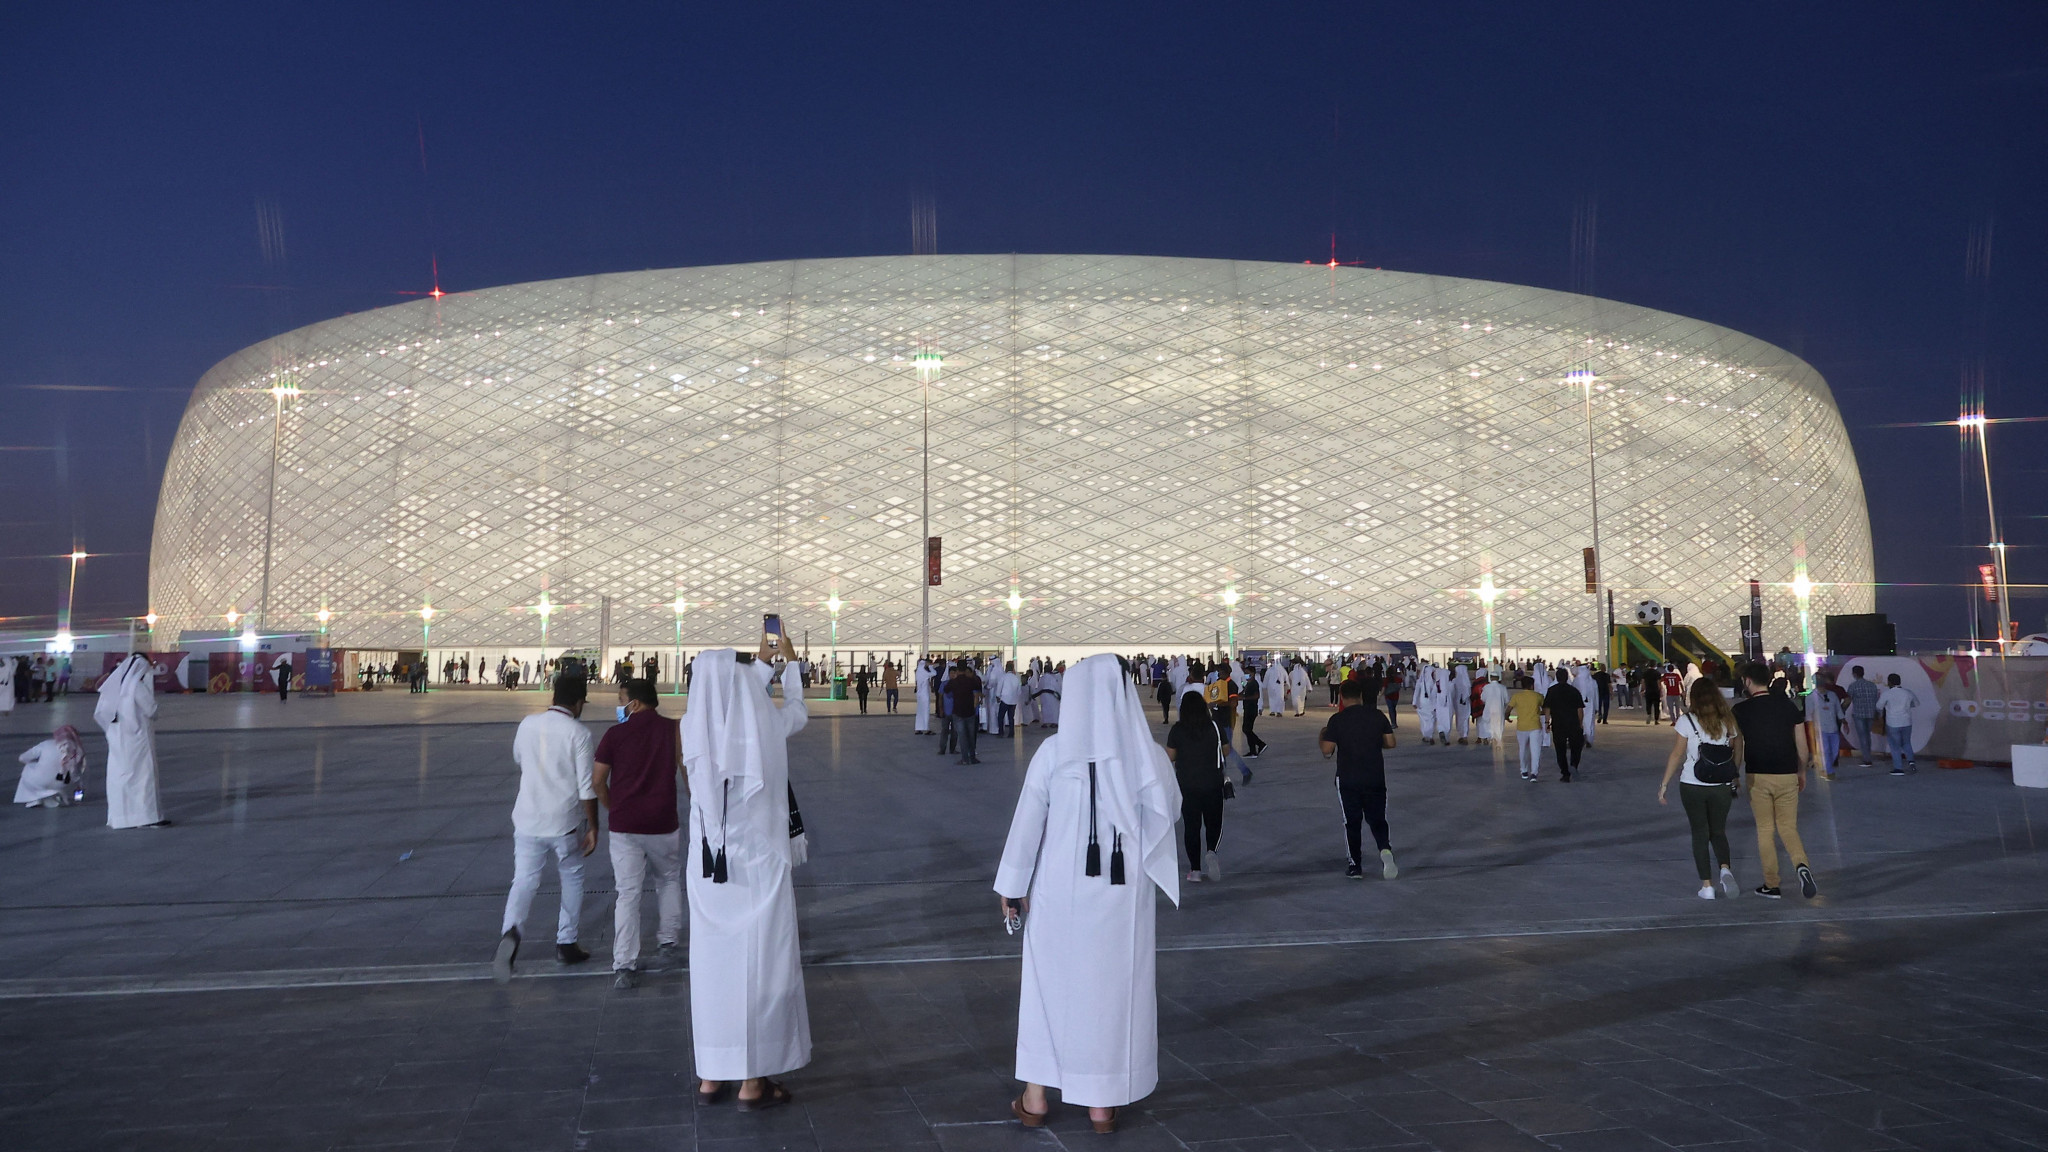 The FIFA World Cup is scheduled to take place in Qatar from November 21 to December 18 ©Getty Images